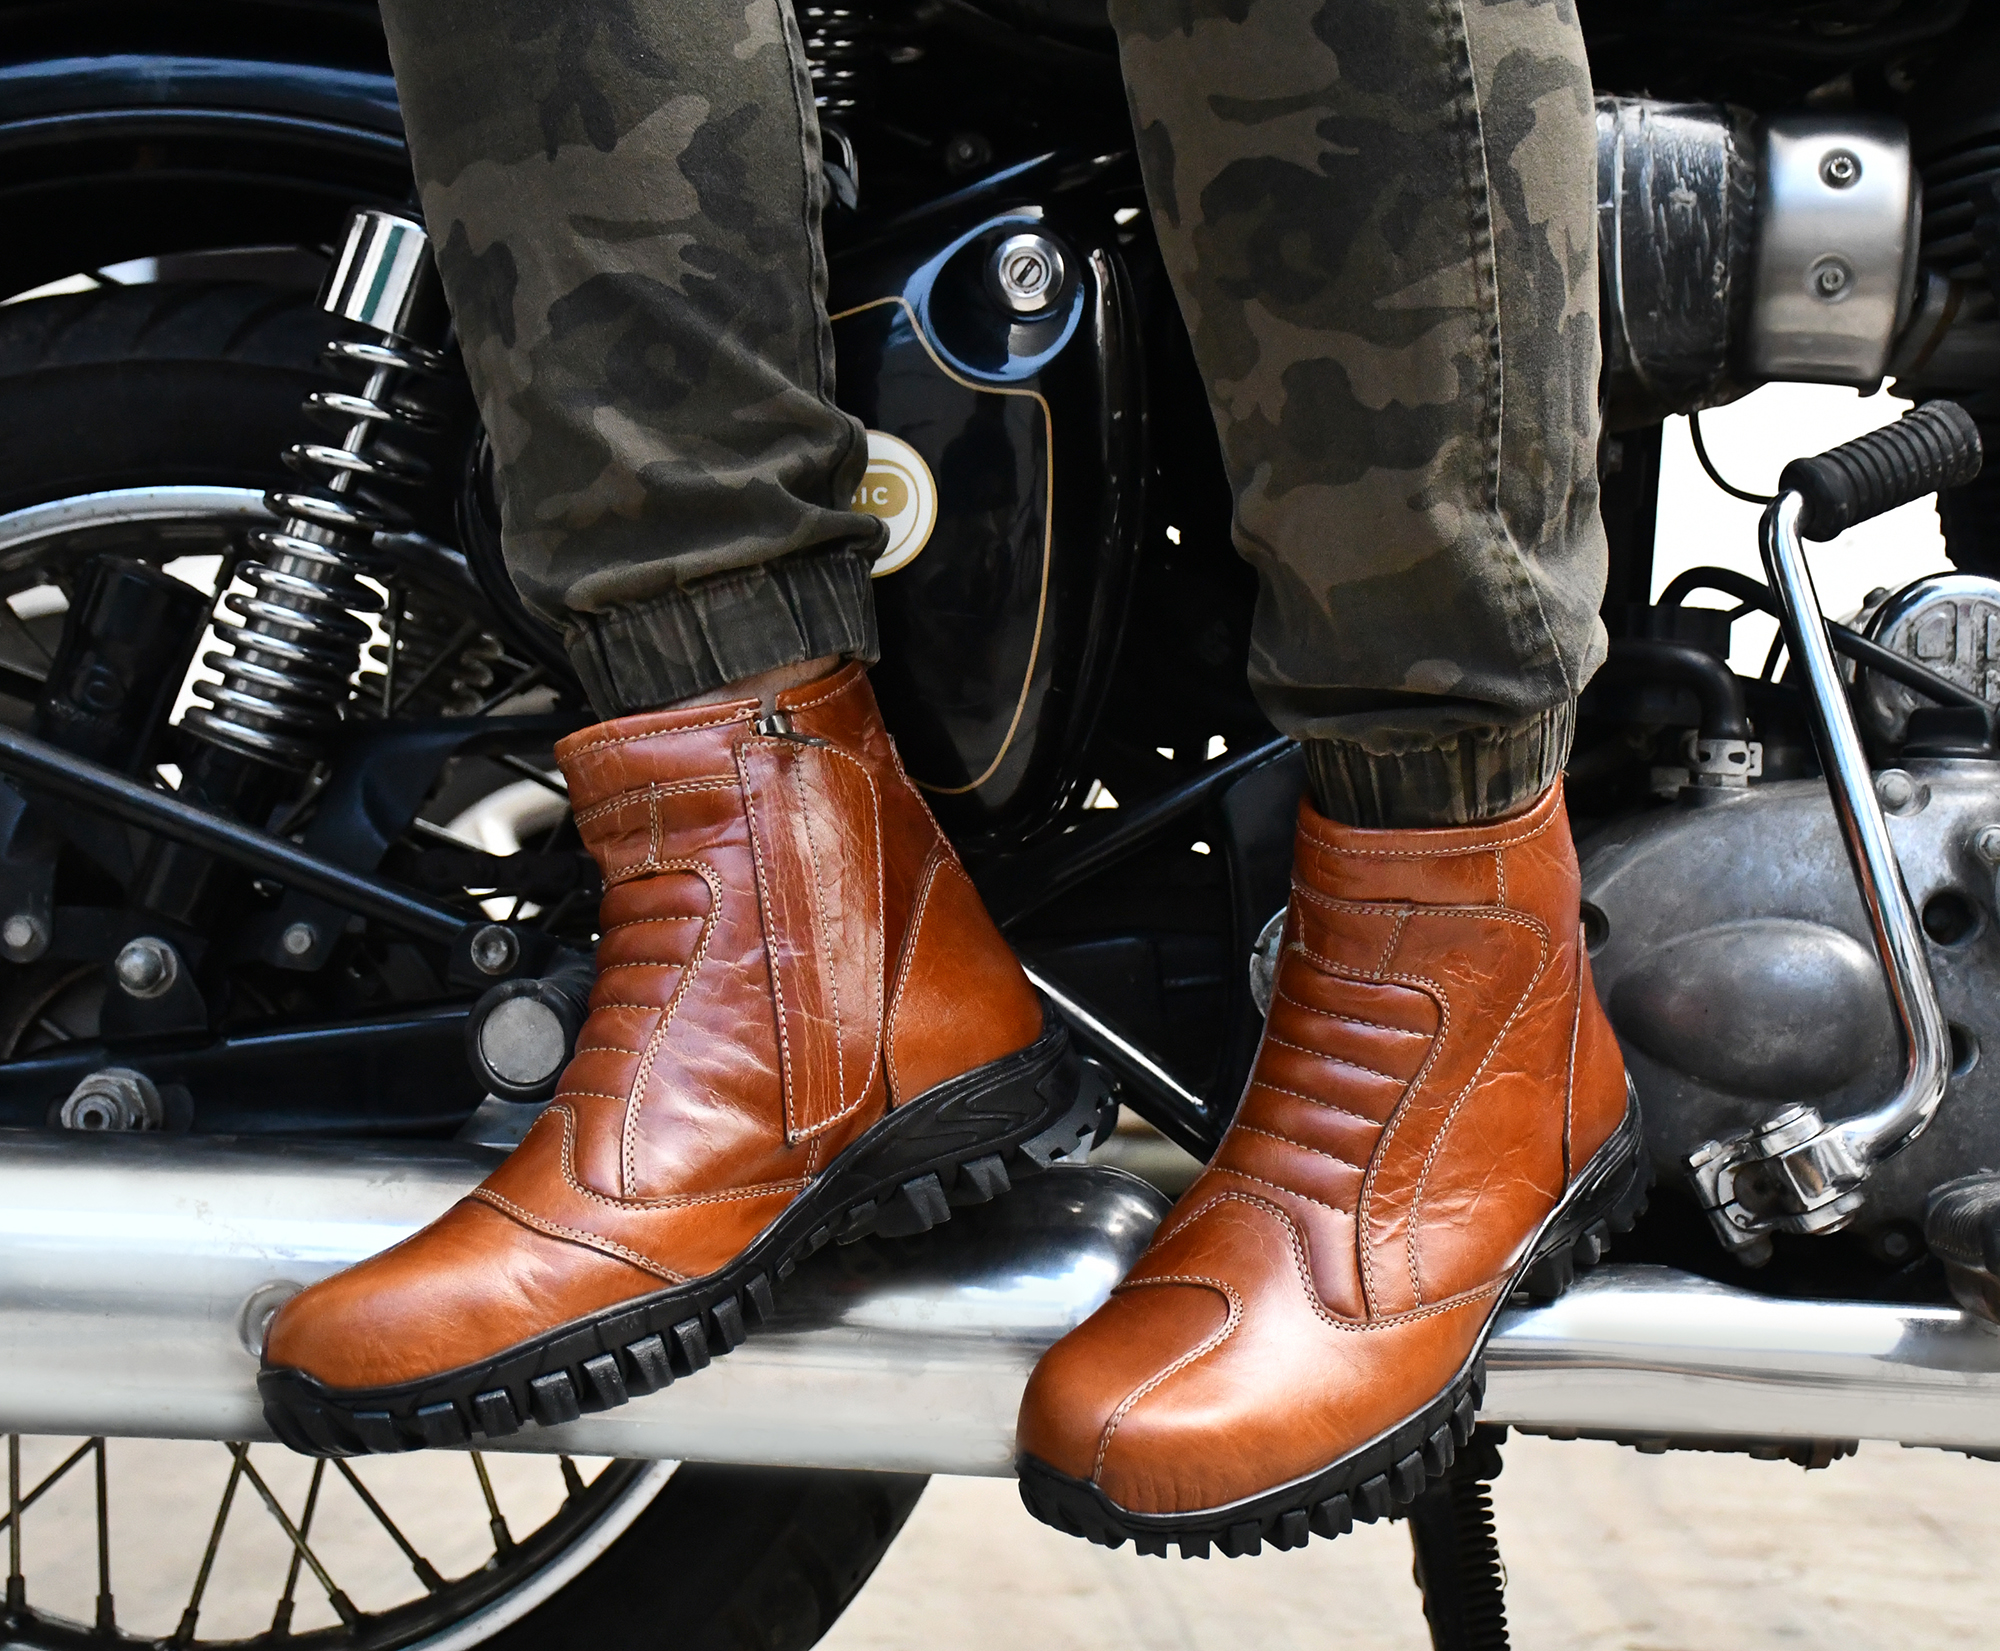 Biker Boots : Urban leather Boots with side chain for Bikers with heavy duty Rubber Sole by ASM. Article : 709Tan